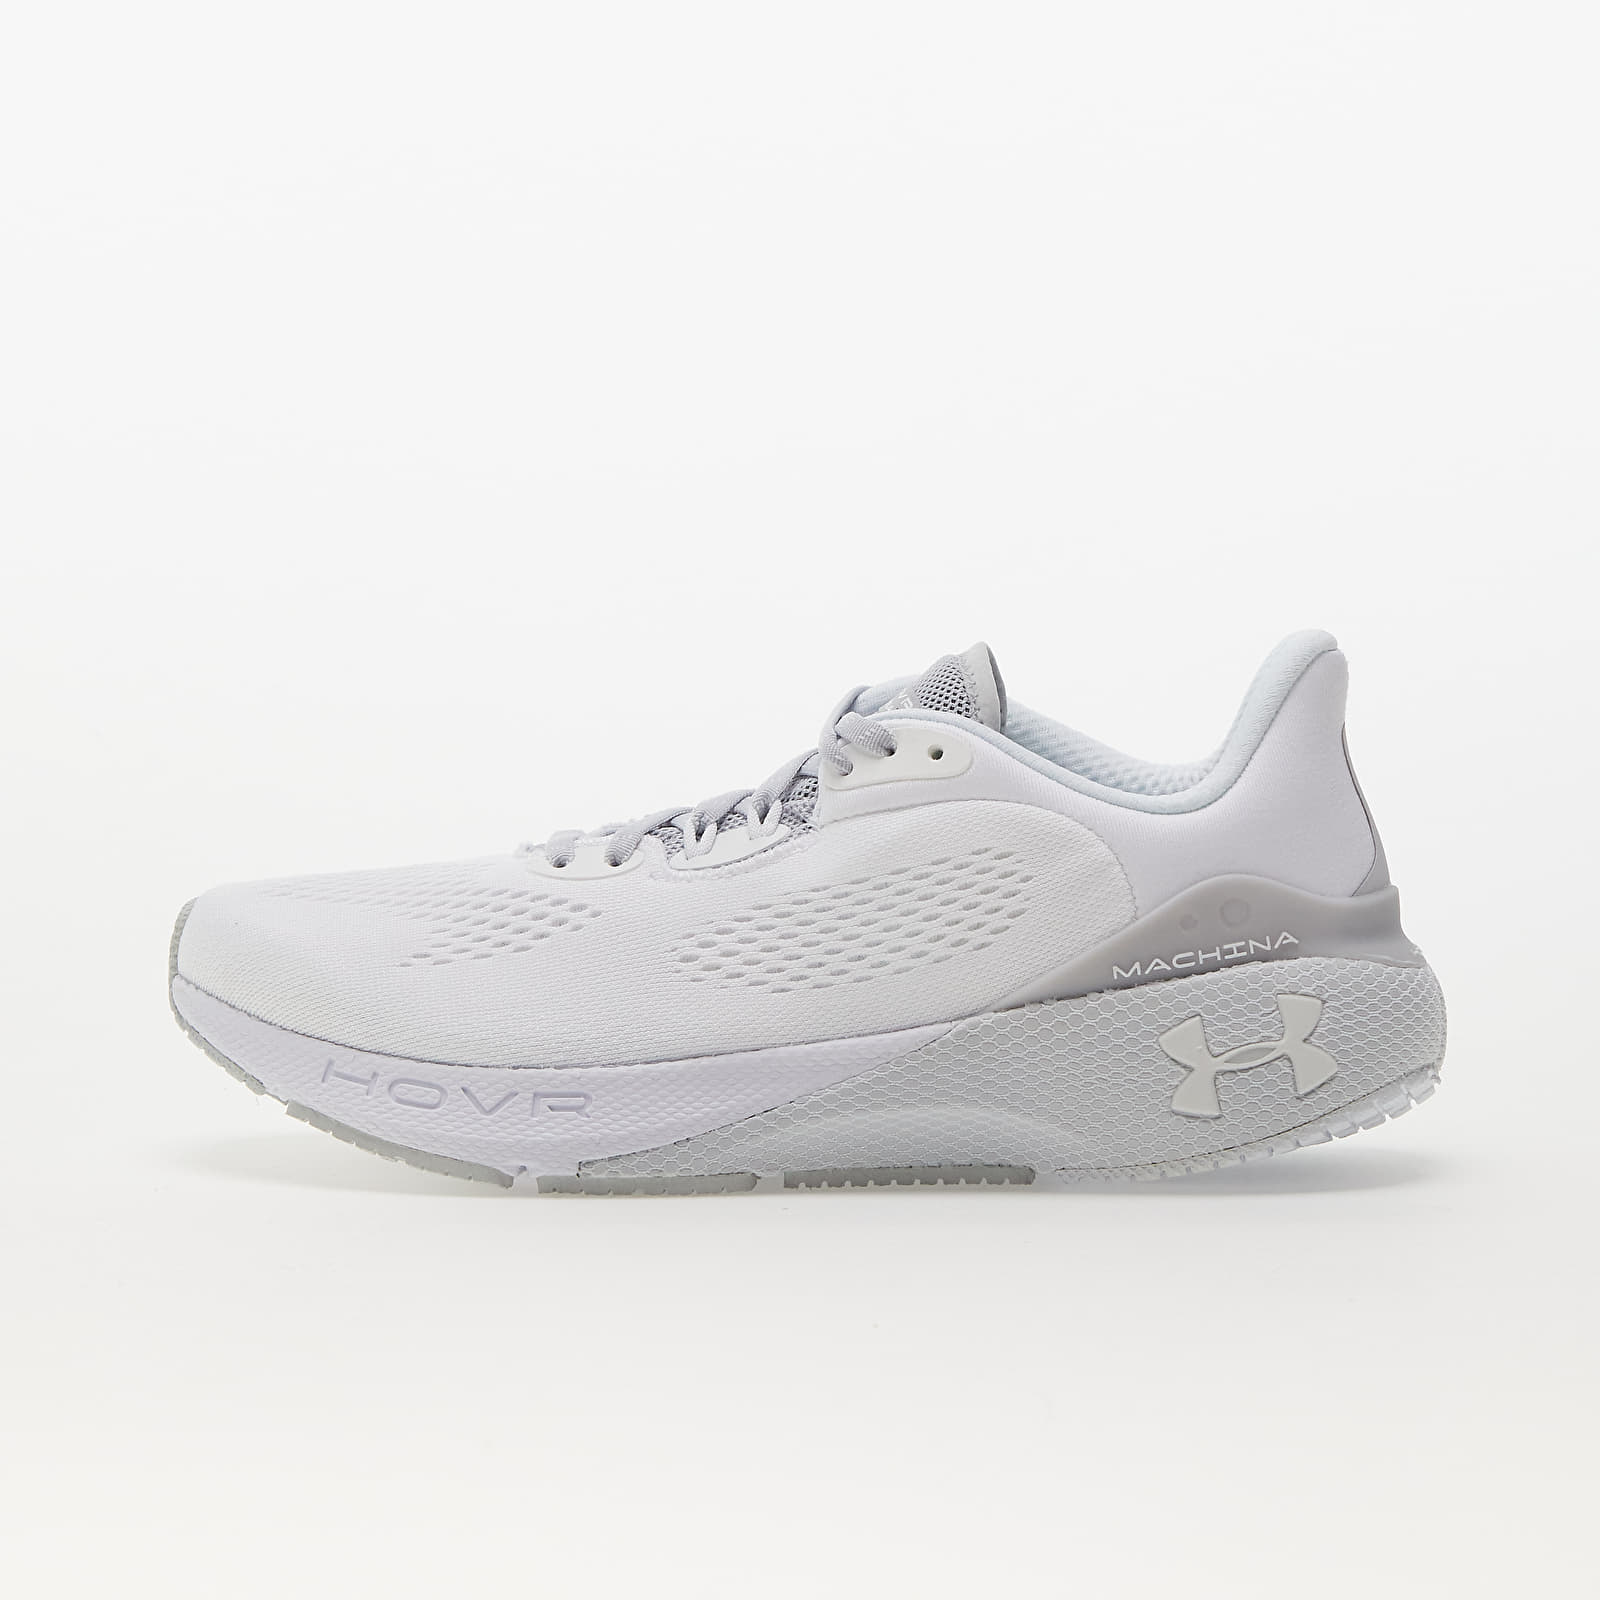 Chaussures et baskets homme Under Armour HOVR Machina 3 White/ Black/ White